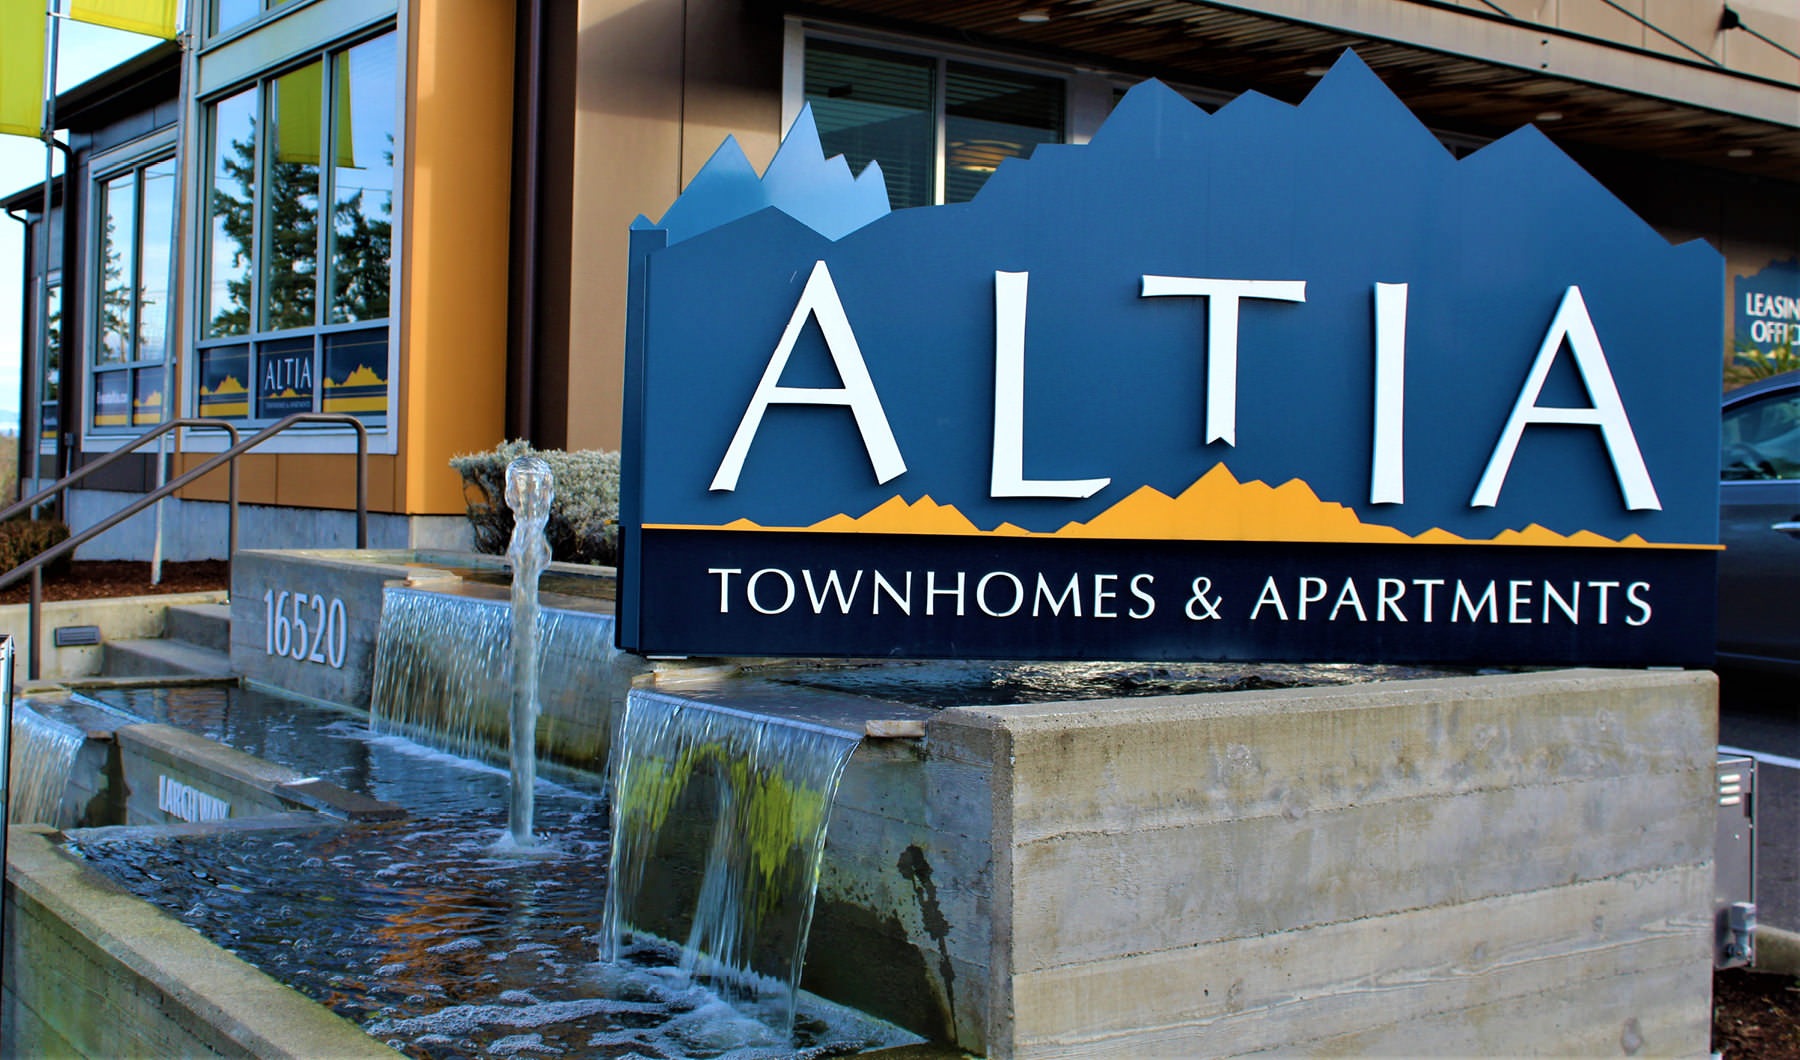 Altia signage surrounded by water features at office entrance